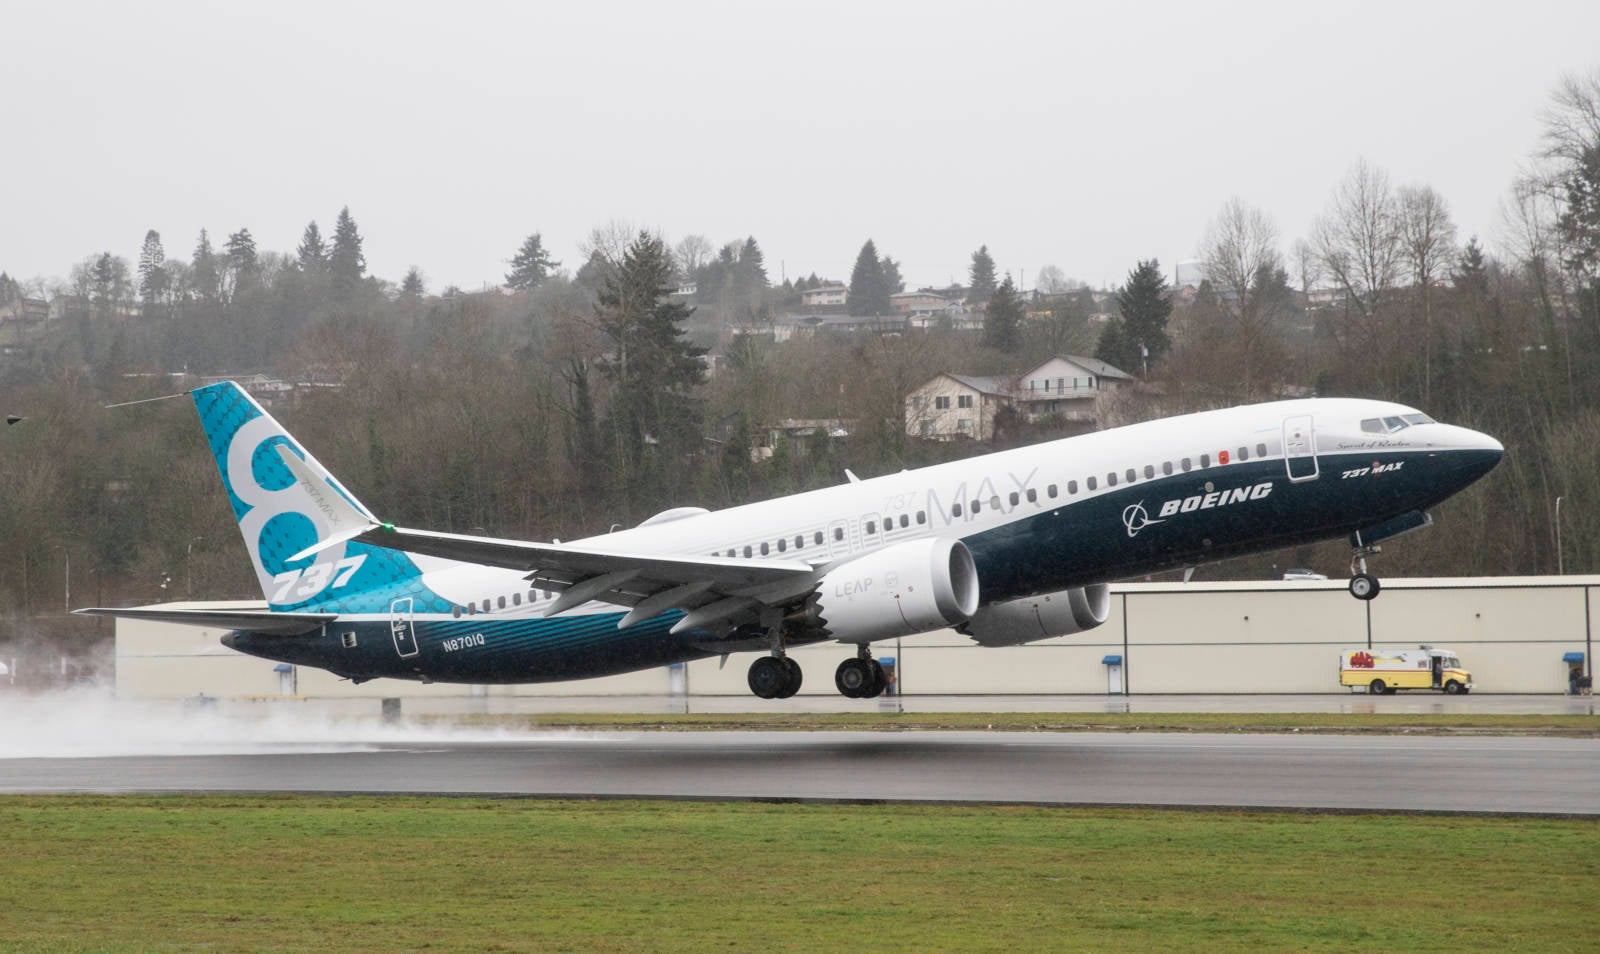 Boeing Holds First Test Flight For 737 MAX Aircraft